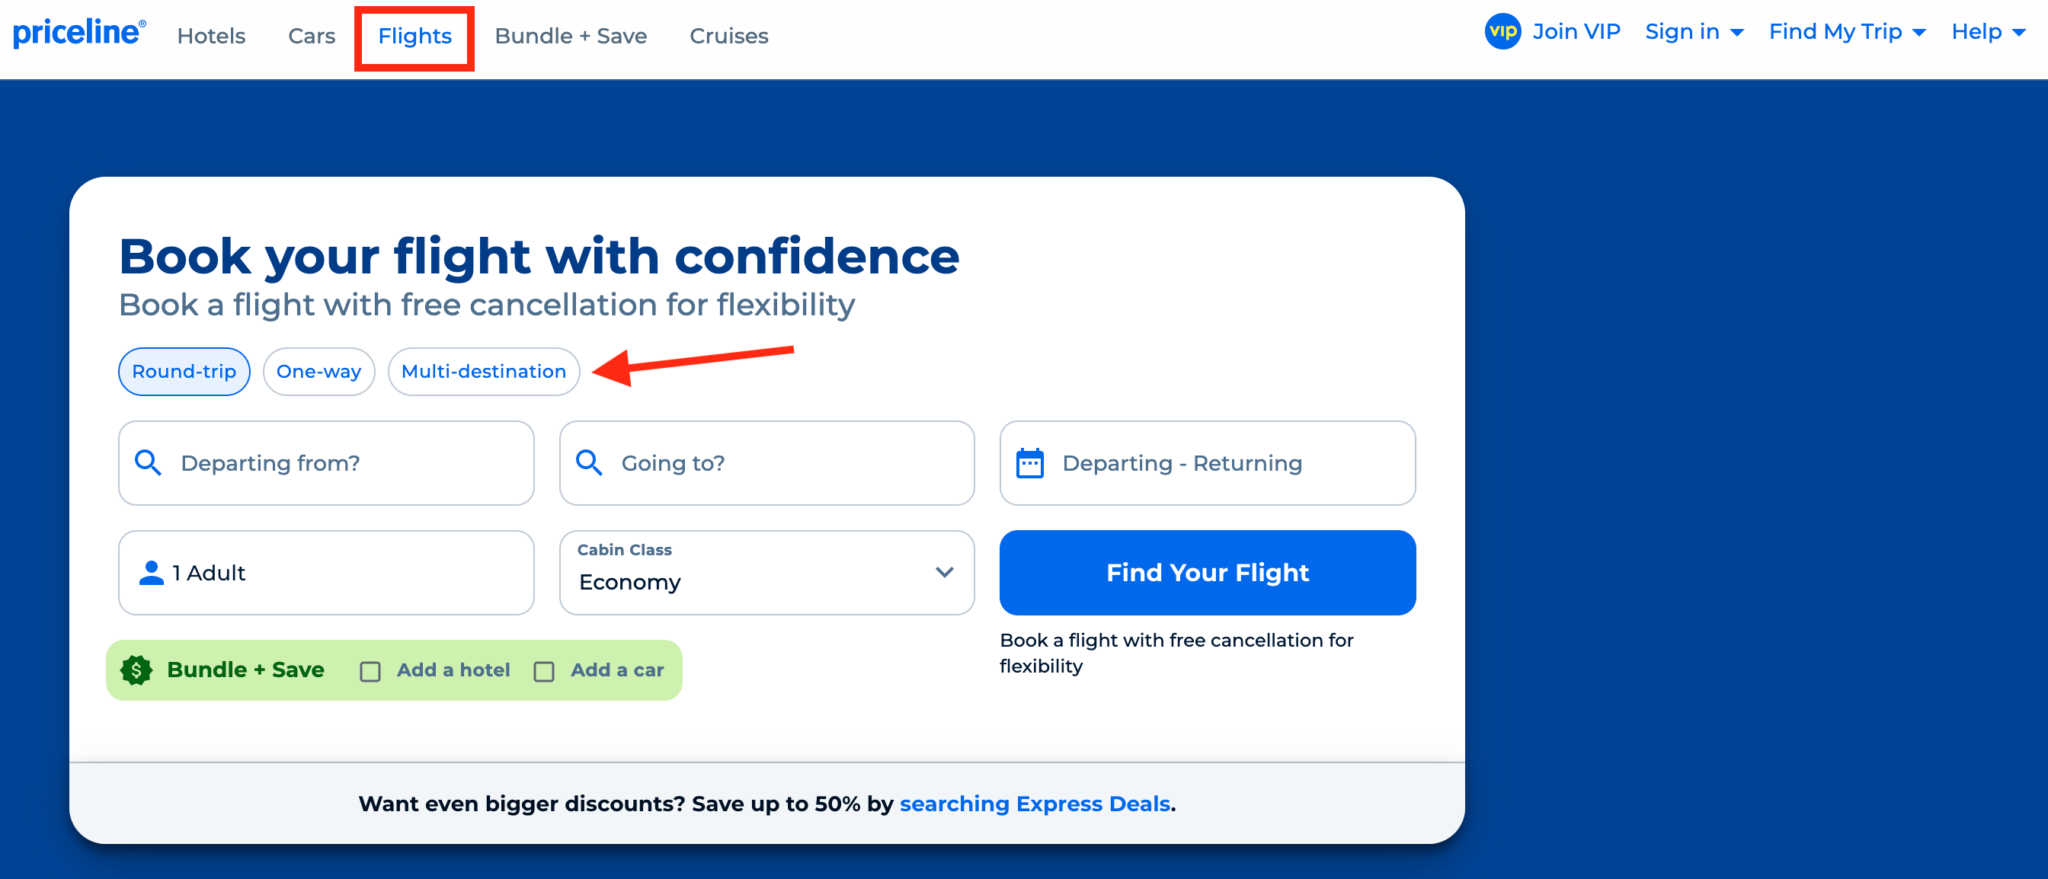 A Complete Guide To Booking Travel With Priceline [2023]